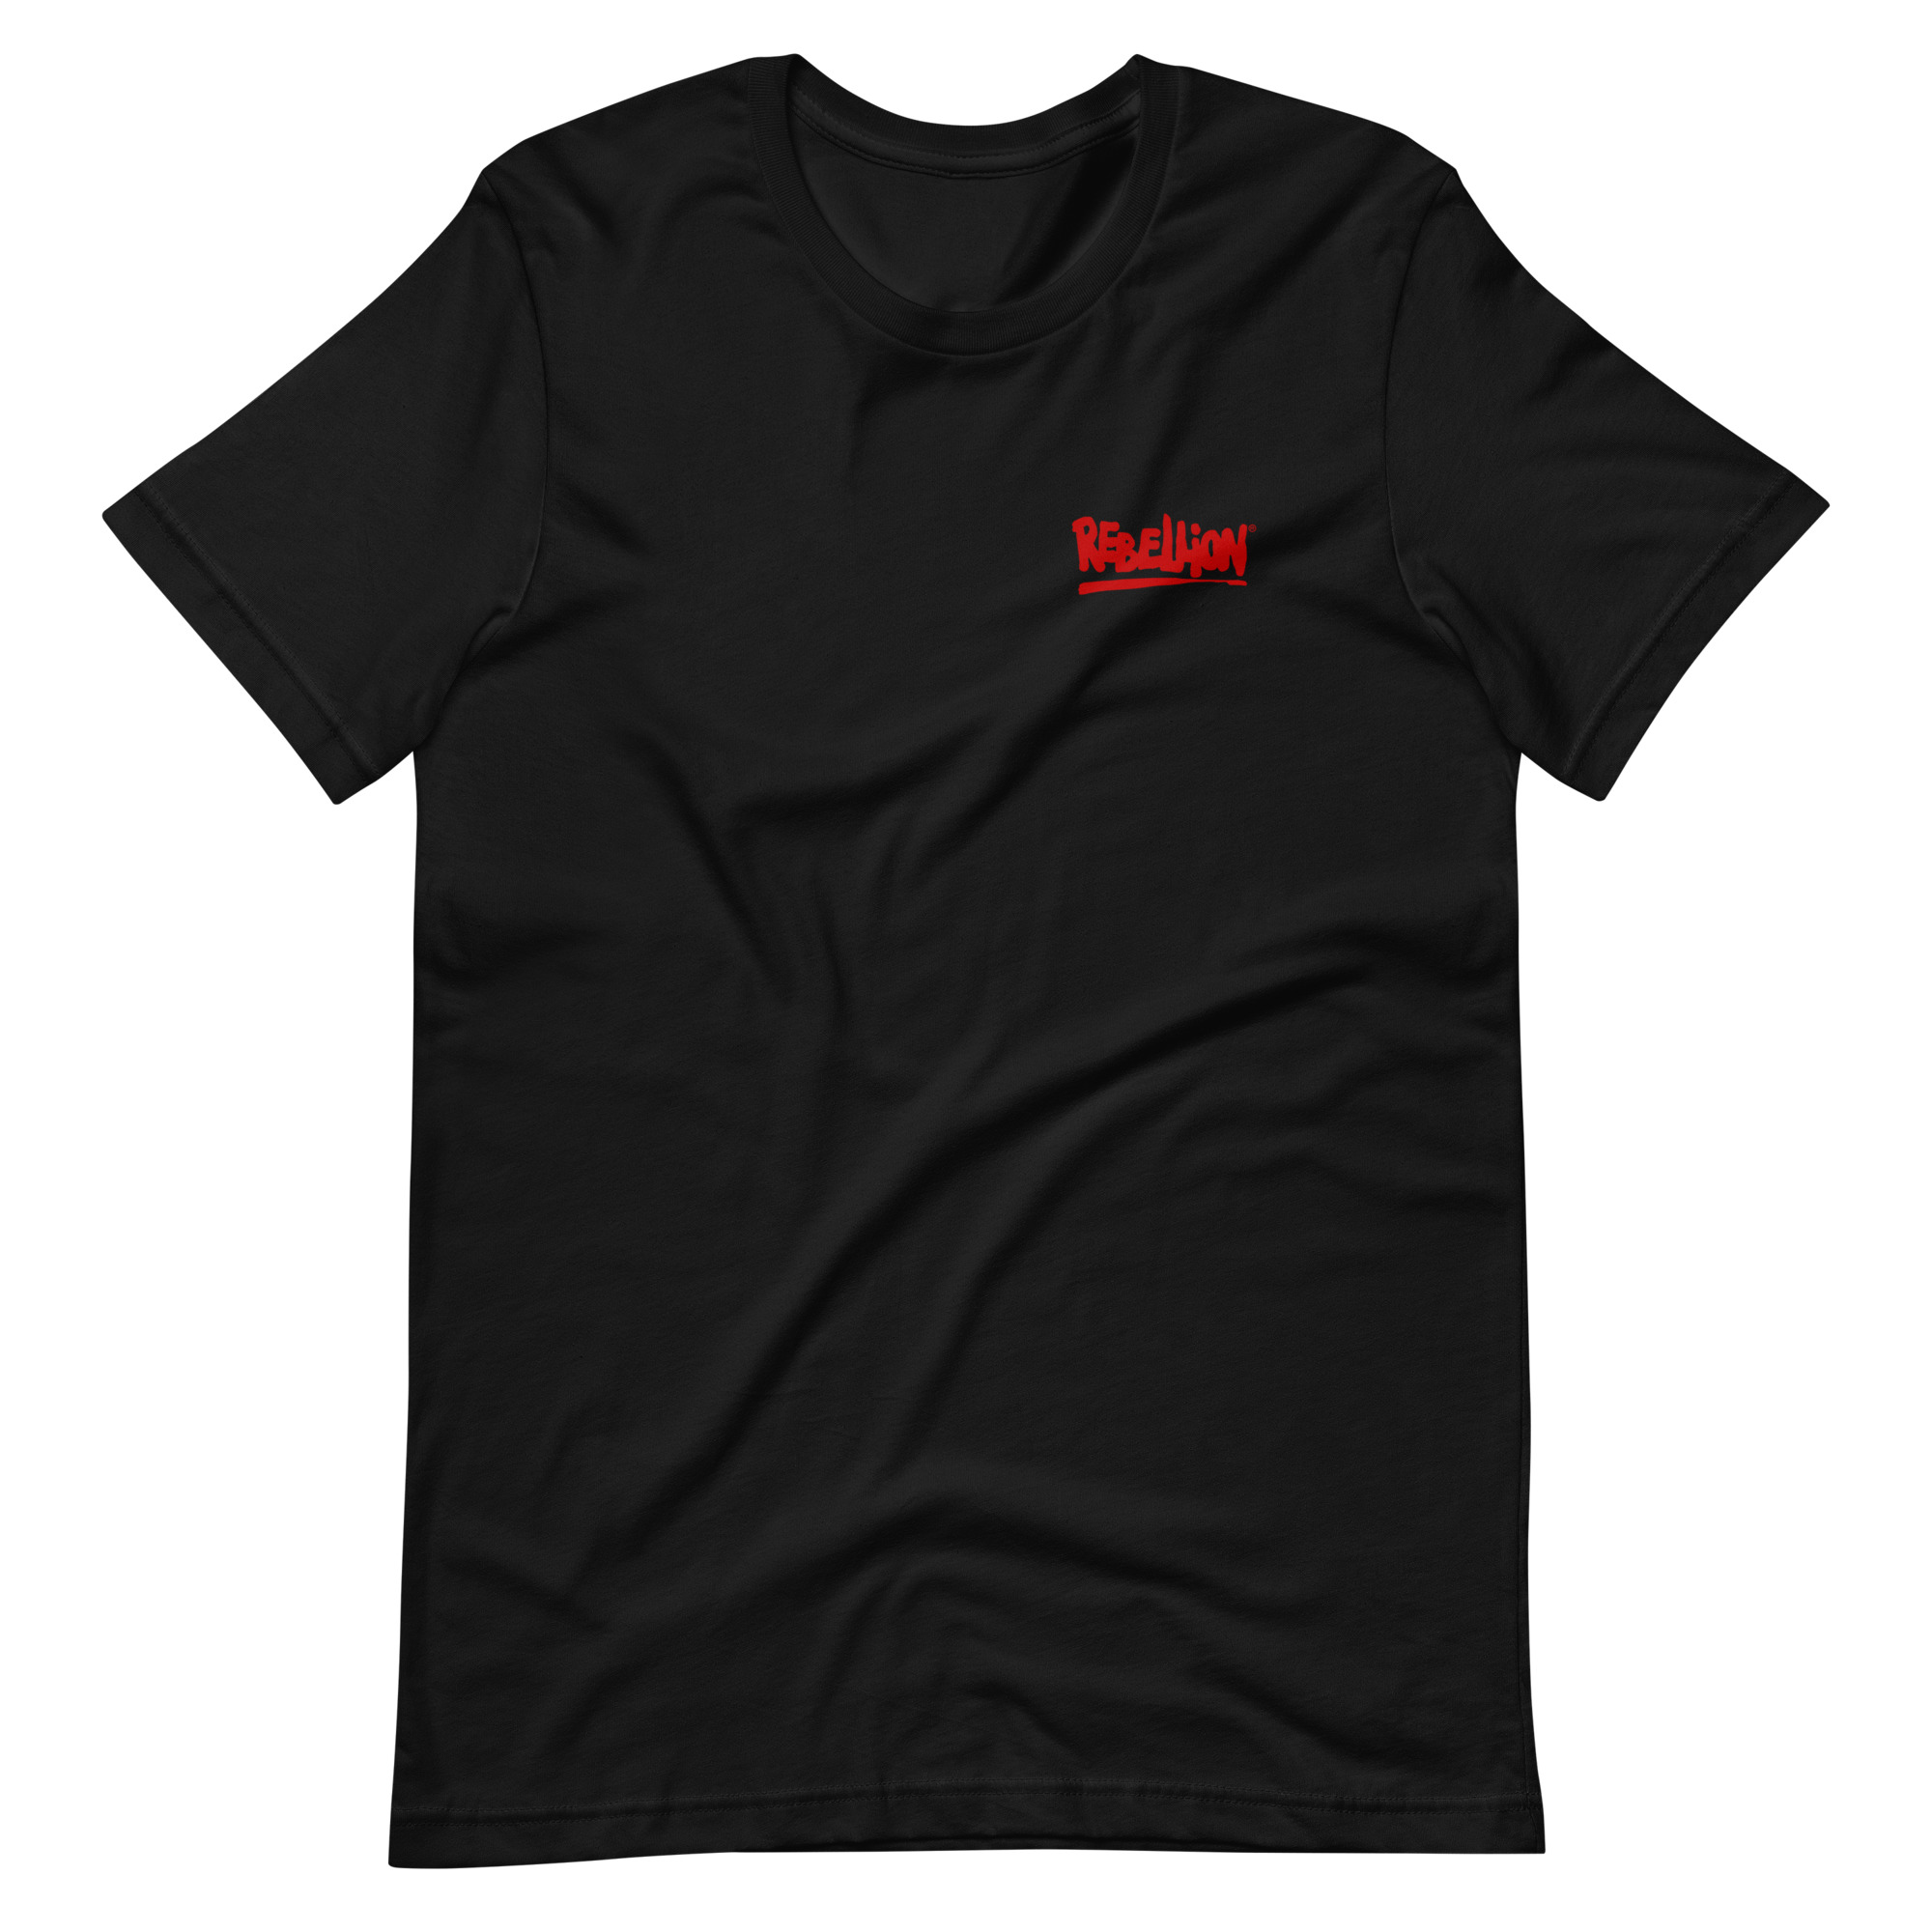 Image of a Black t-shirt with red 